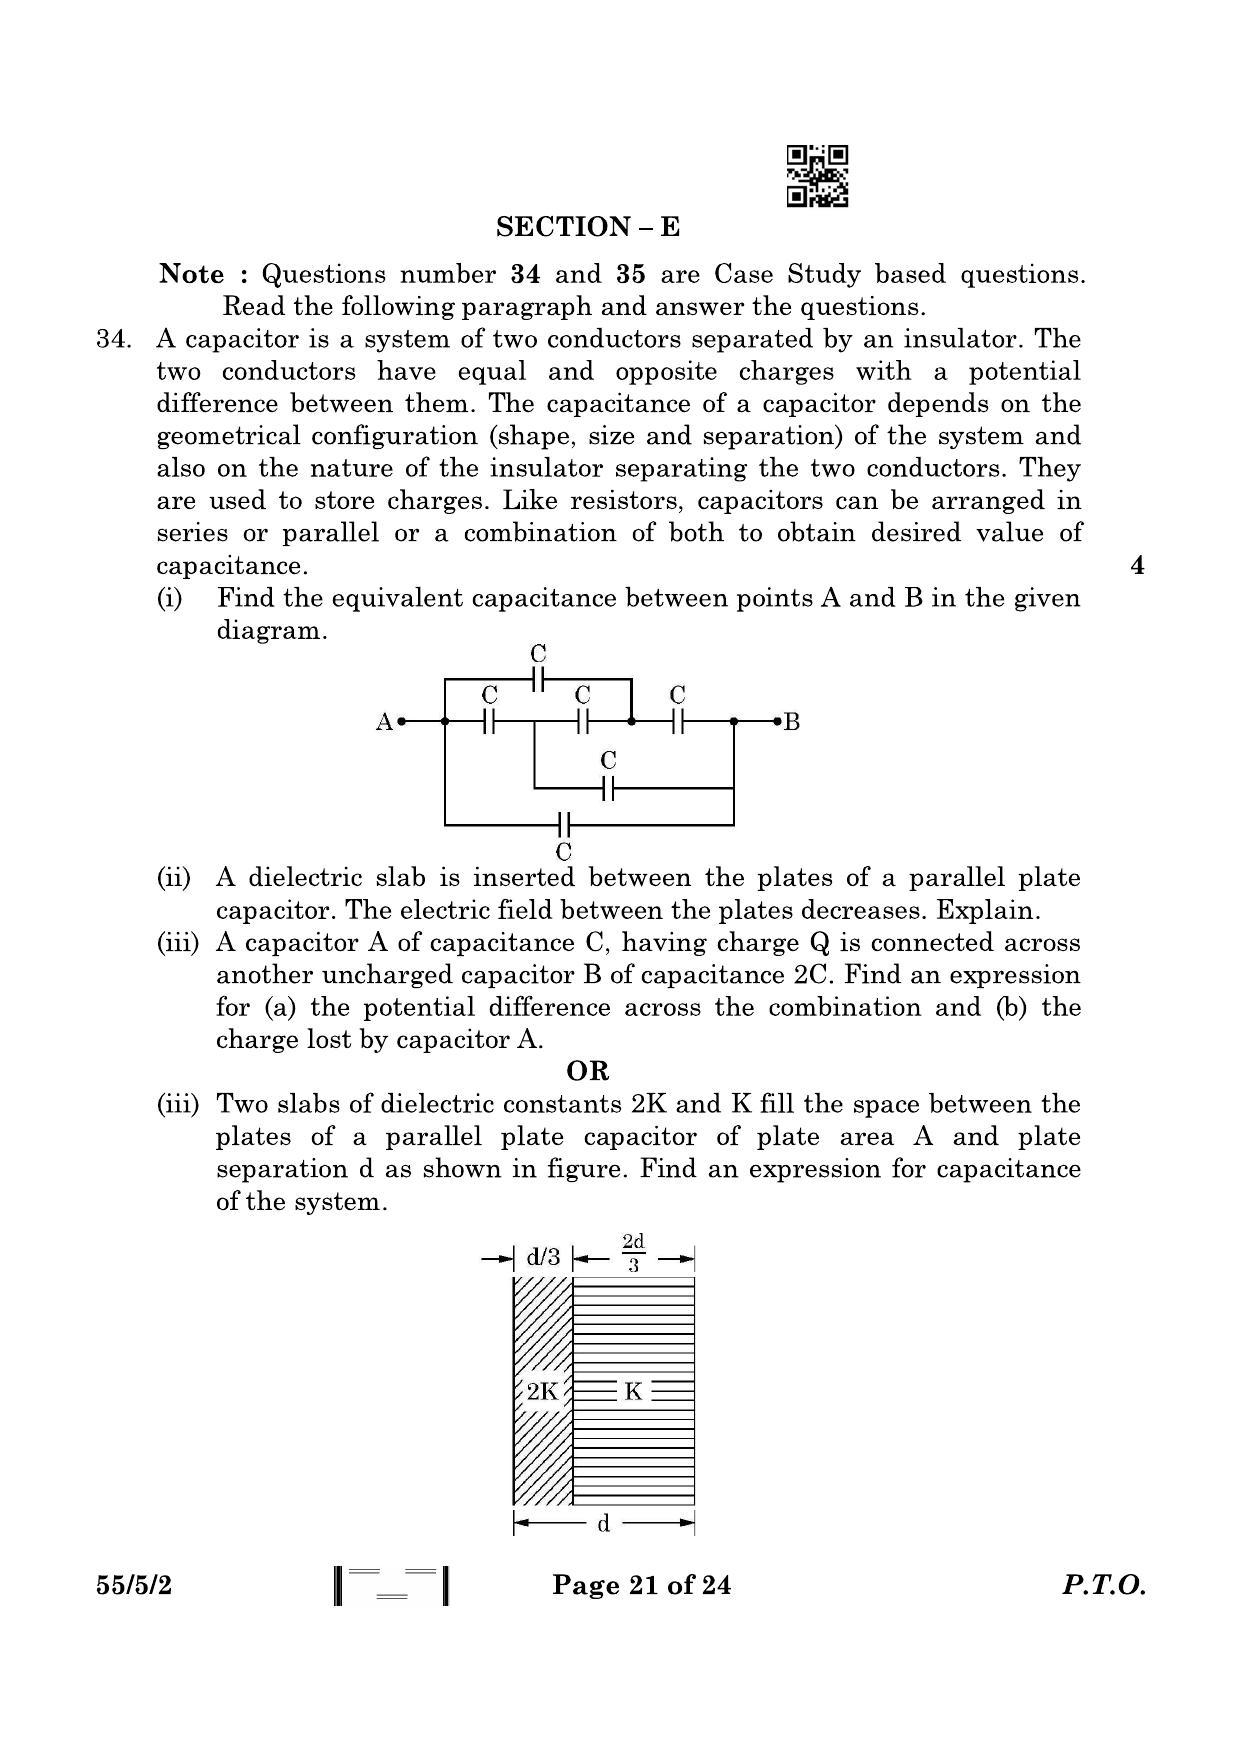 CBSE Class 12 55-5-2 Physics 2023 Question Paper - Page 21